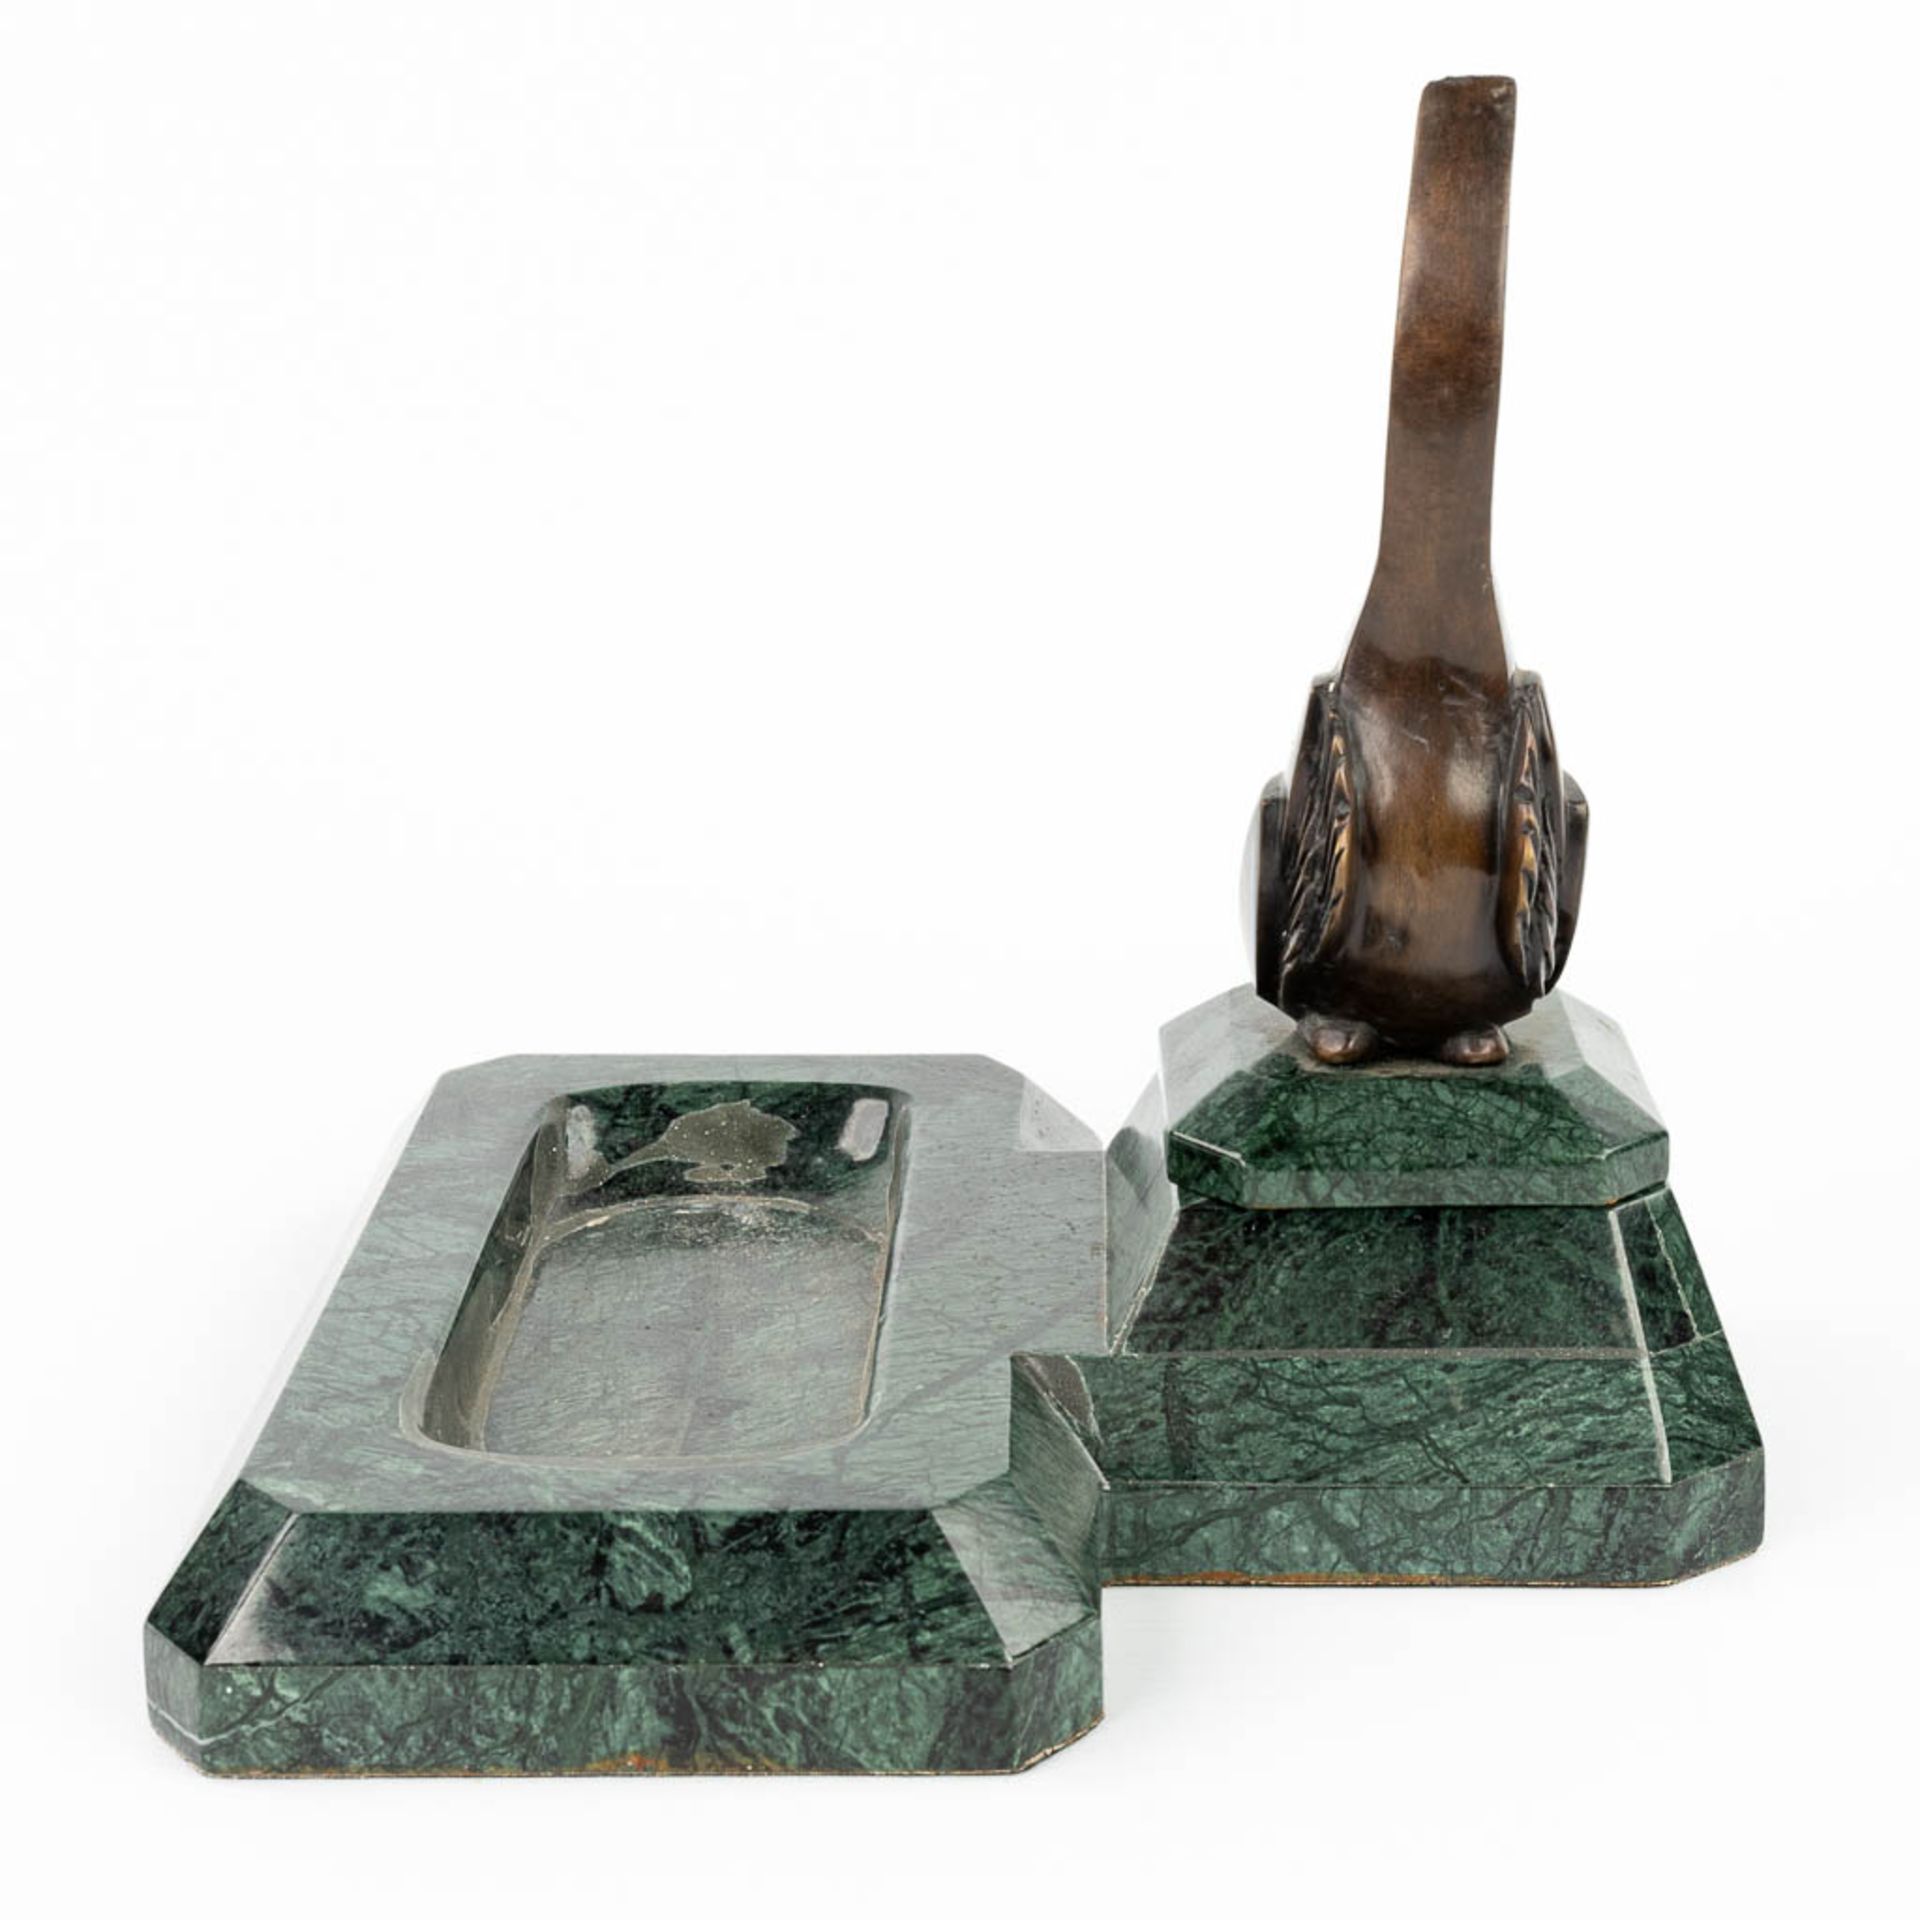 A 'Vide Poche' made of marble with a bird made of bronze in art deco style. - Bild 4 aus 10